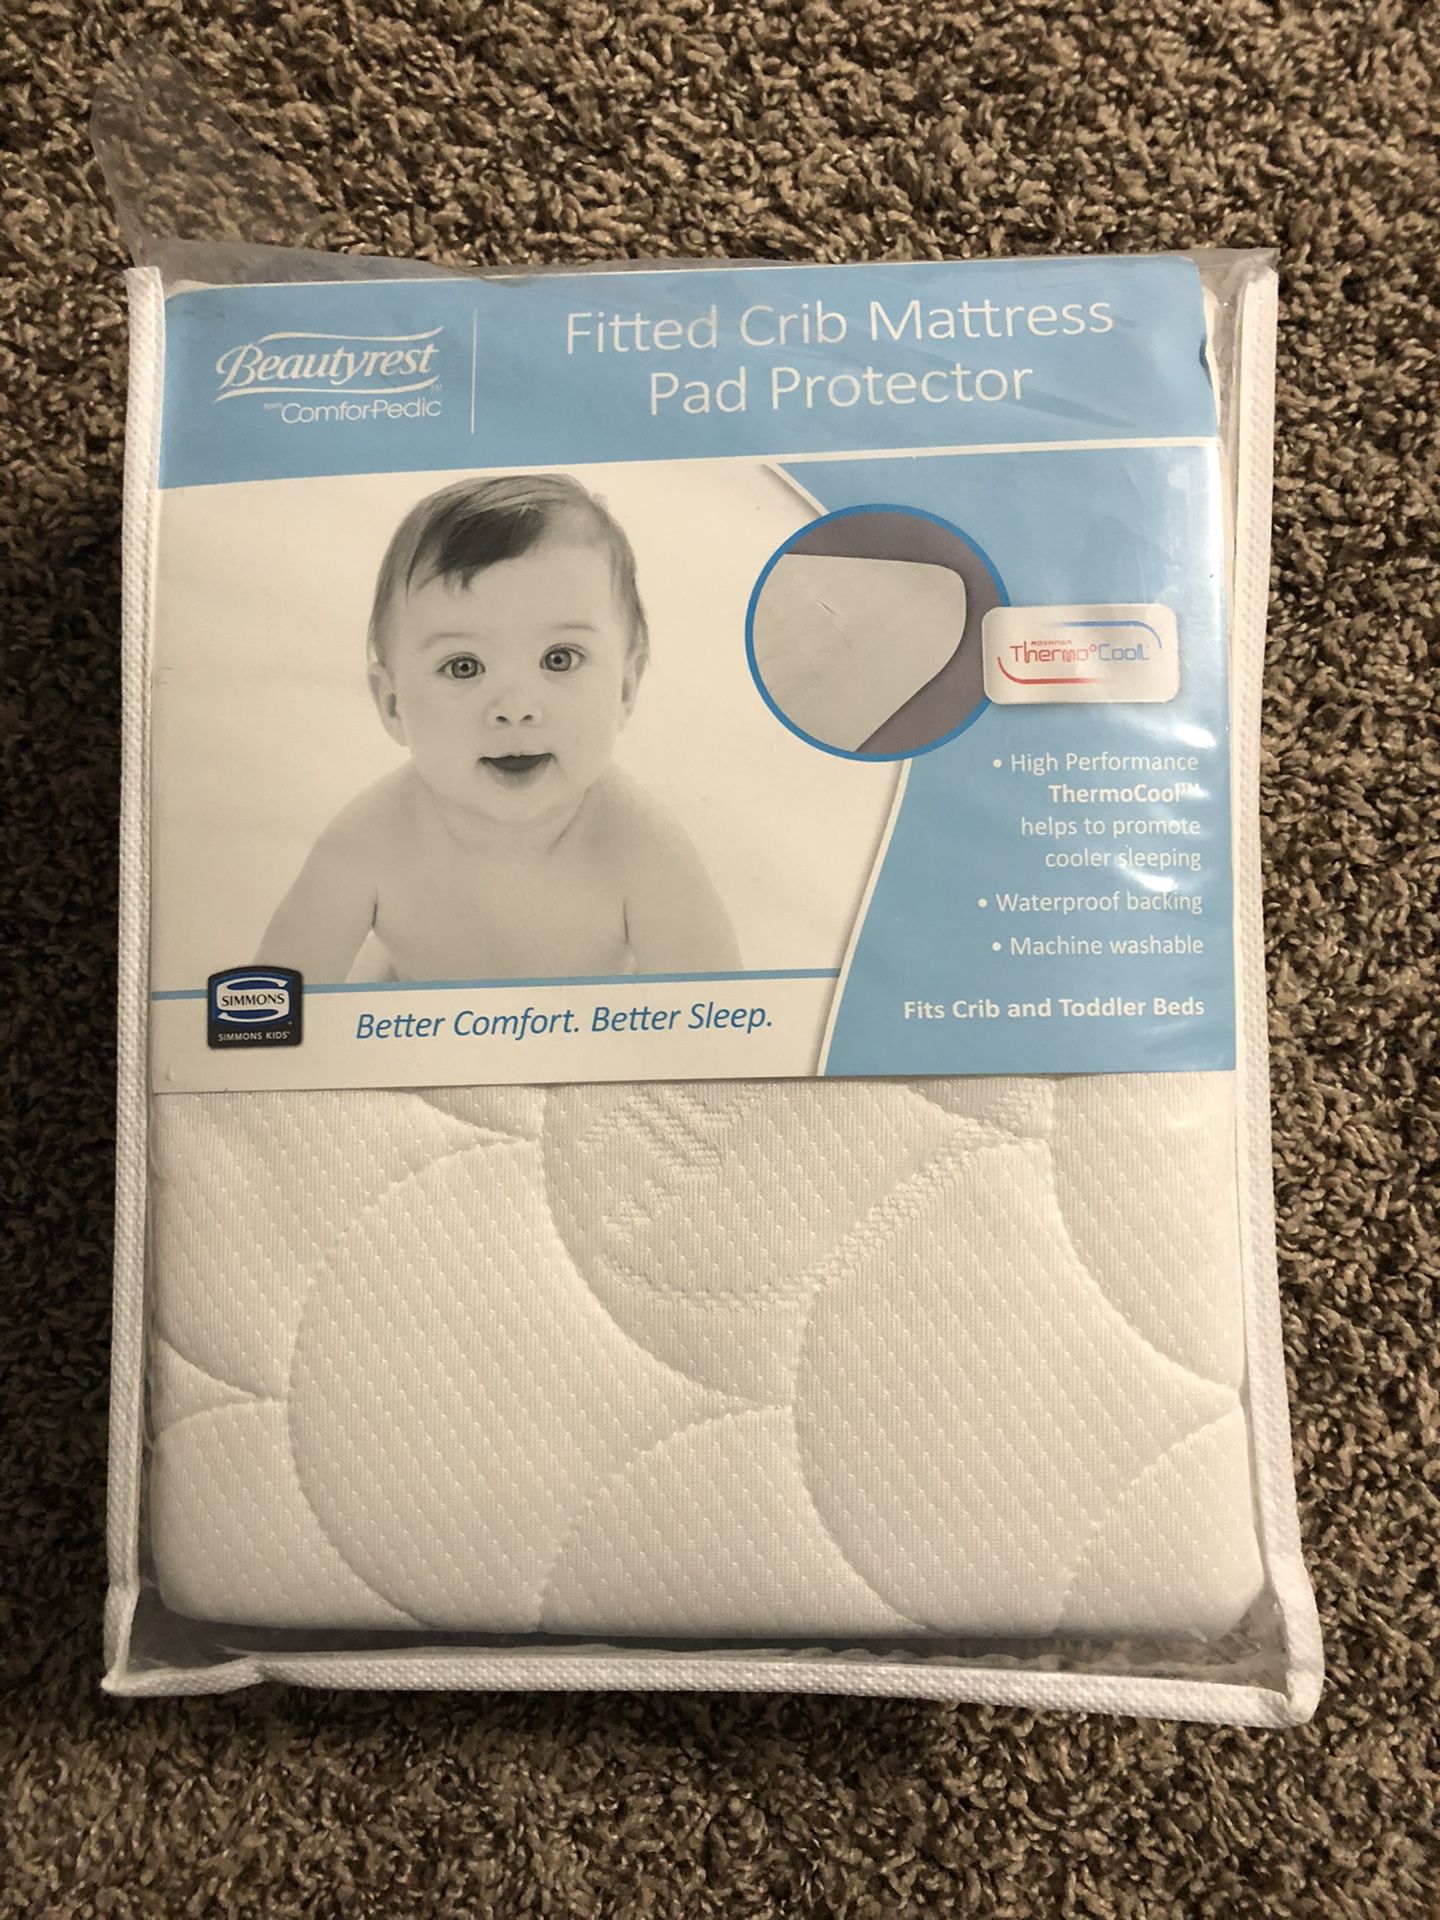 Fitted Crib Mattress Pad Protector